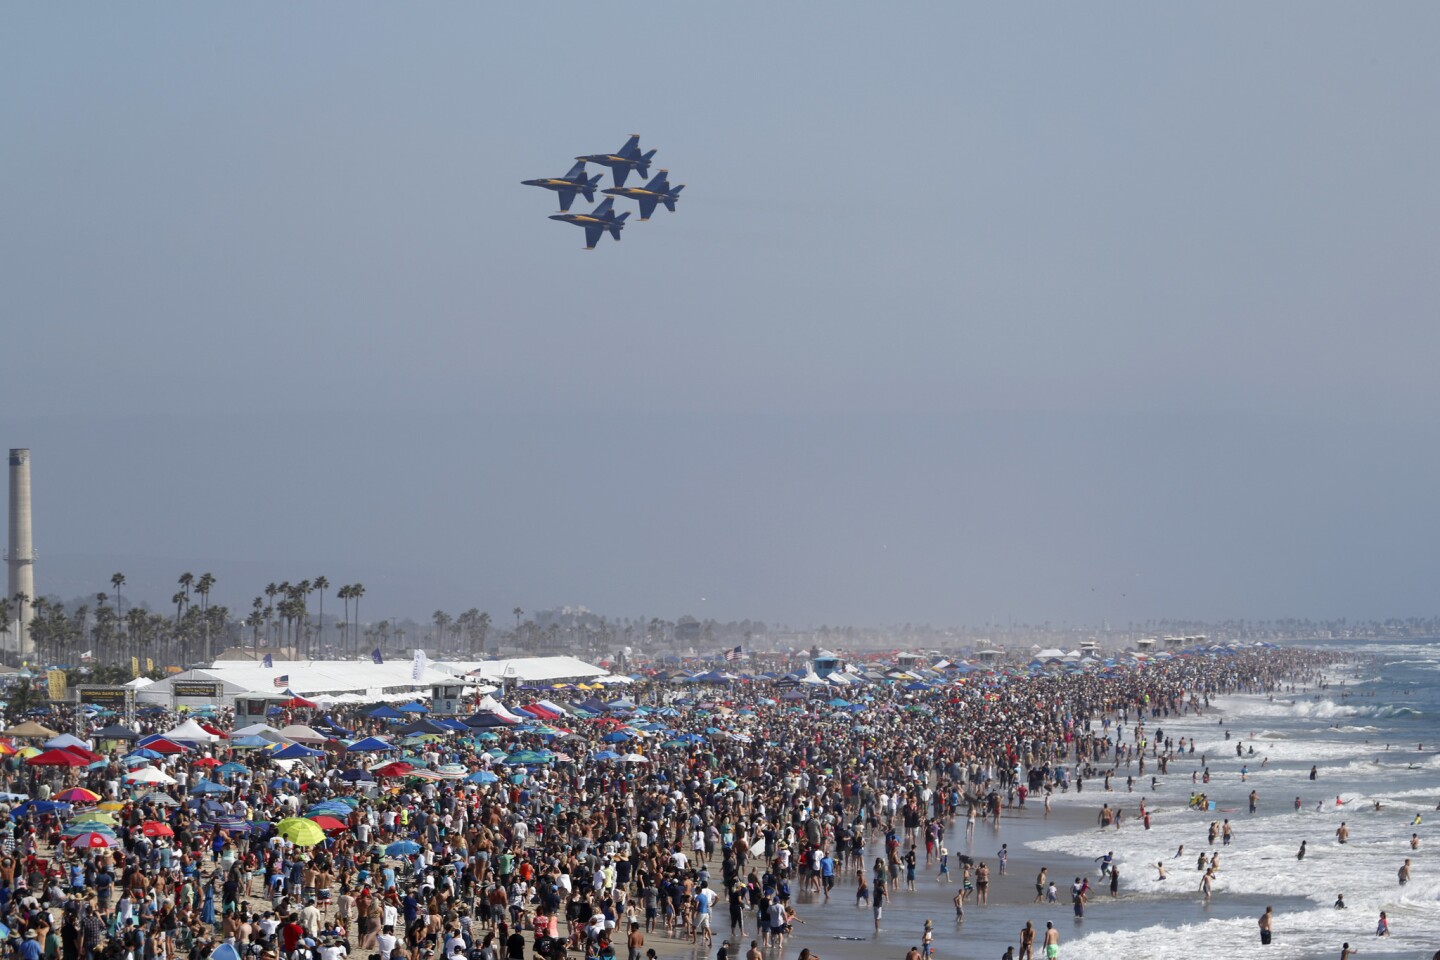 Look up in the sky! It's the Huntington Beach Air Show Los Angeles